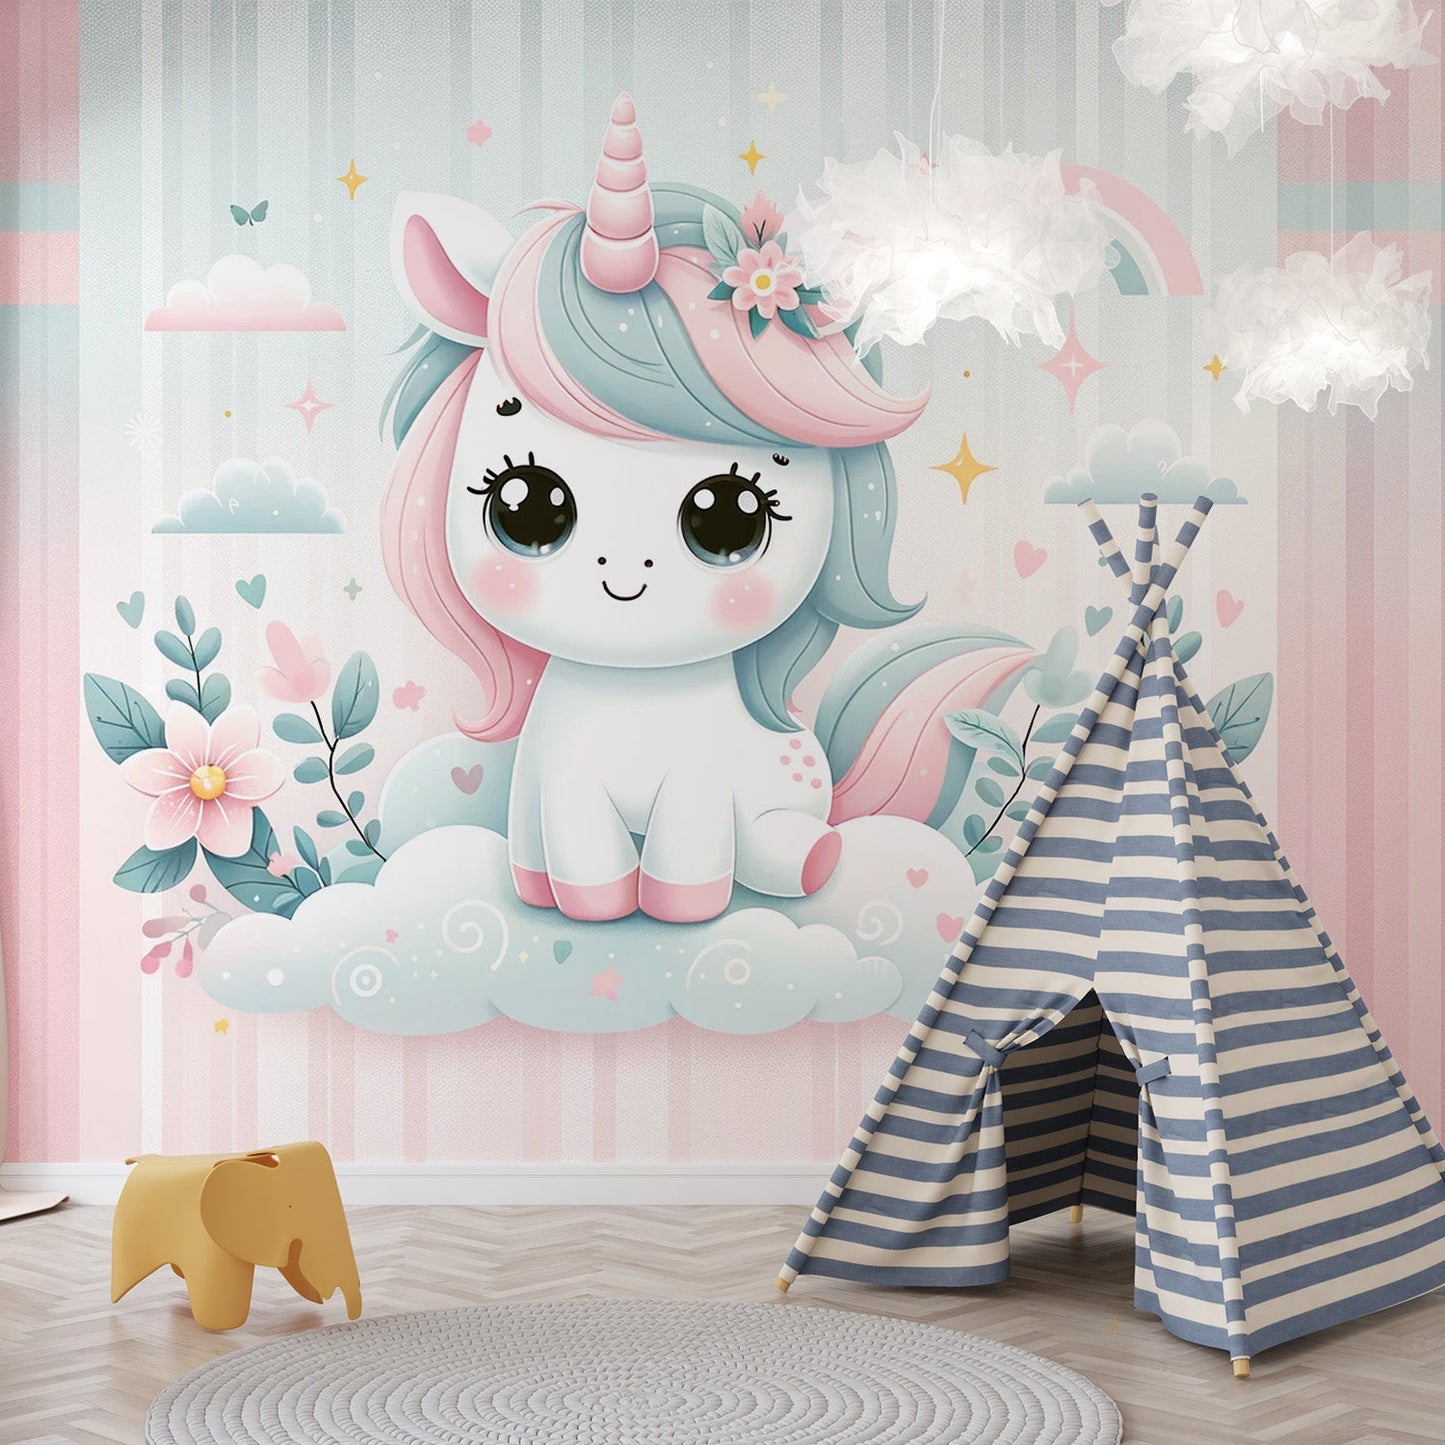 Unicorn Wallpaper | Striped Background with Small Cloud